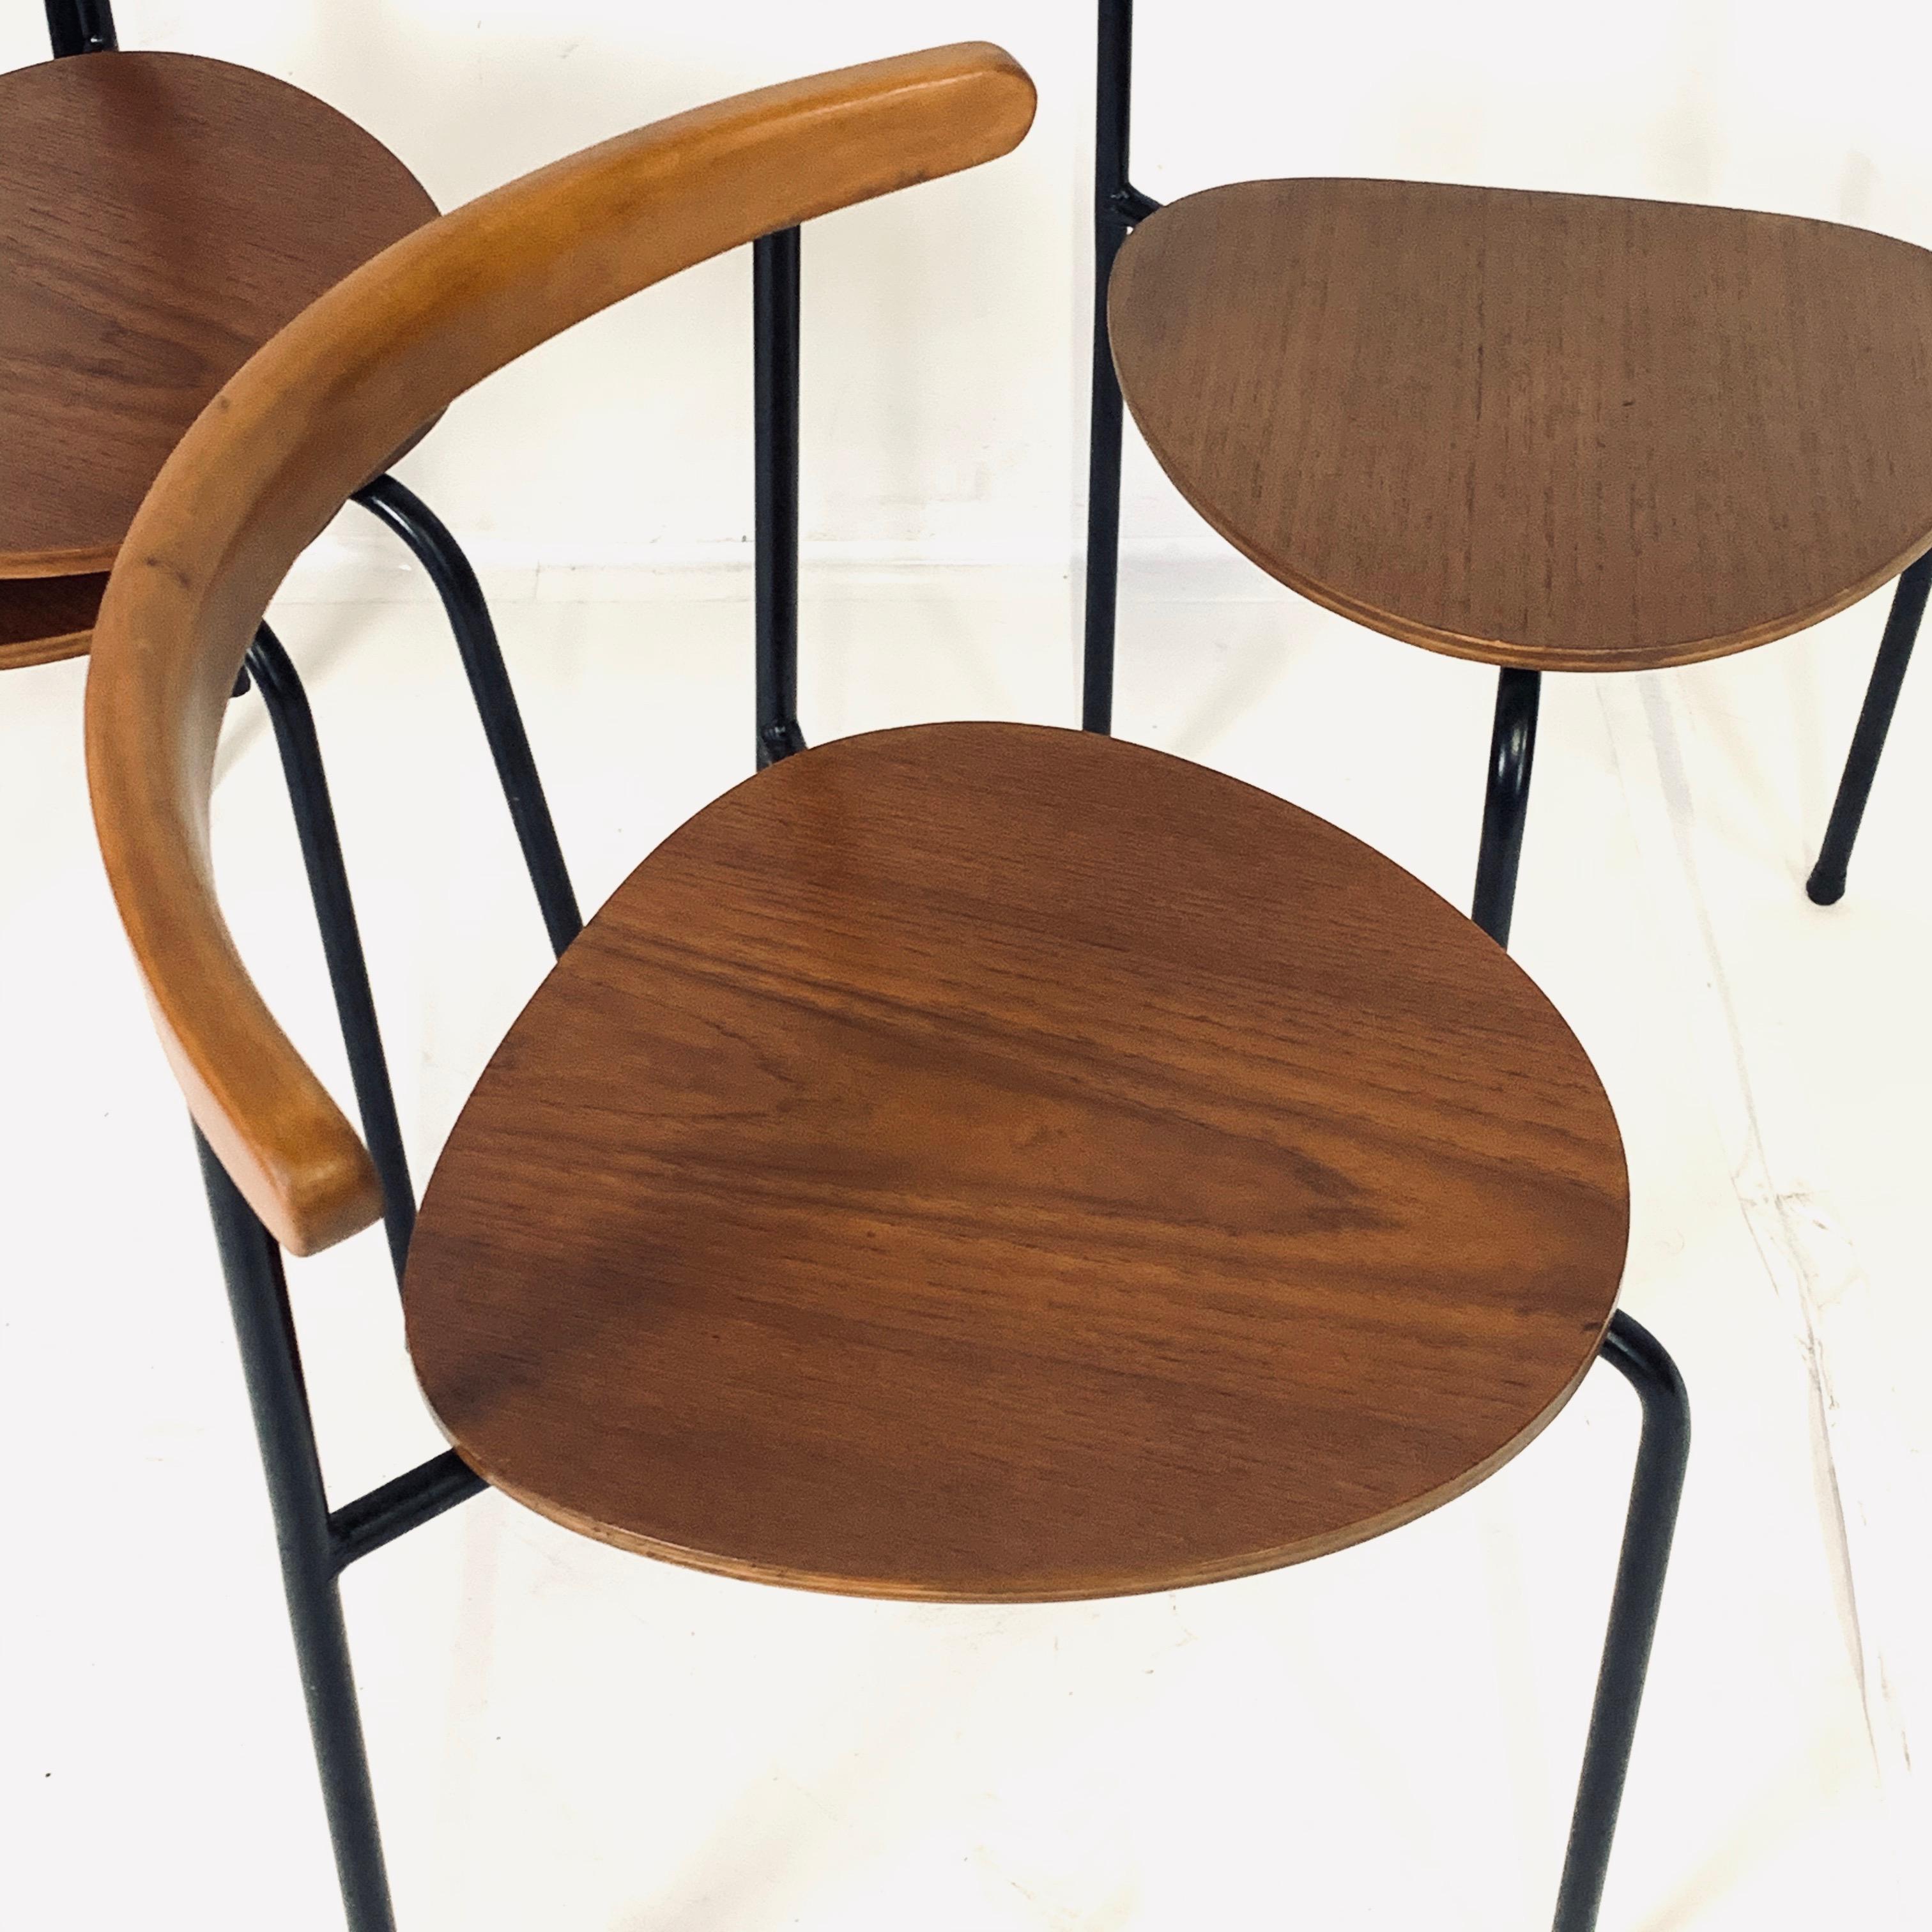 Stunning, smart, sculptural and space saving set of 4 Swedish Modern stacking chairs. These chairs look amazing stacked as well as individually. Perfect set to use as extra seating or stylish primary seating in a small space.
These chairs are